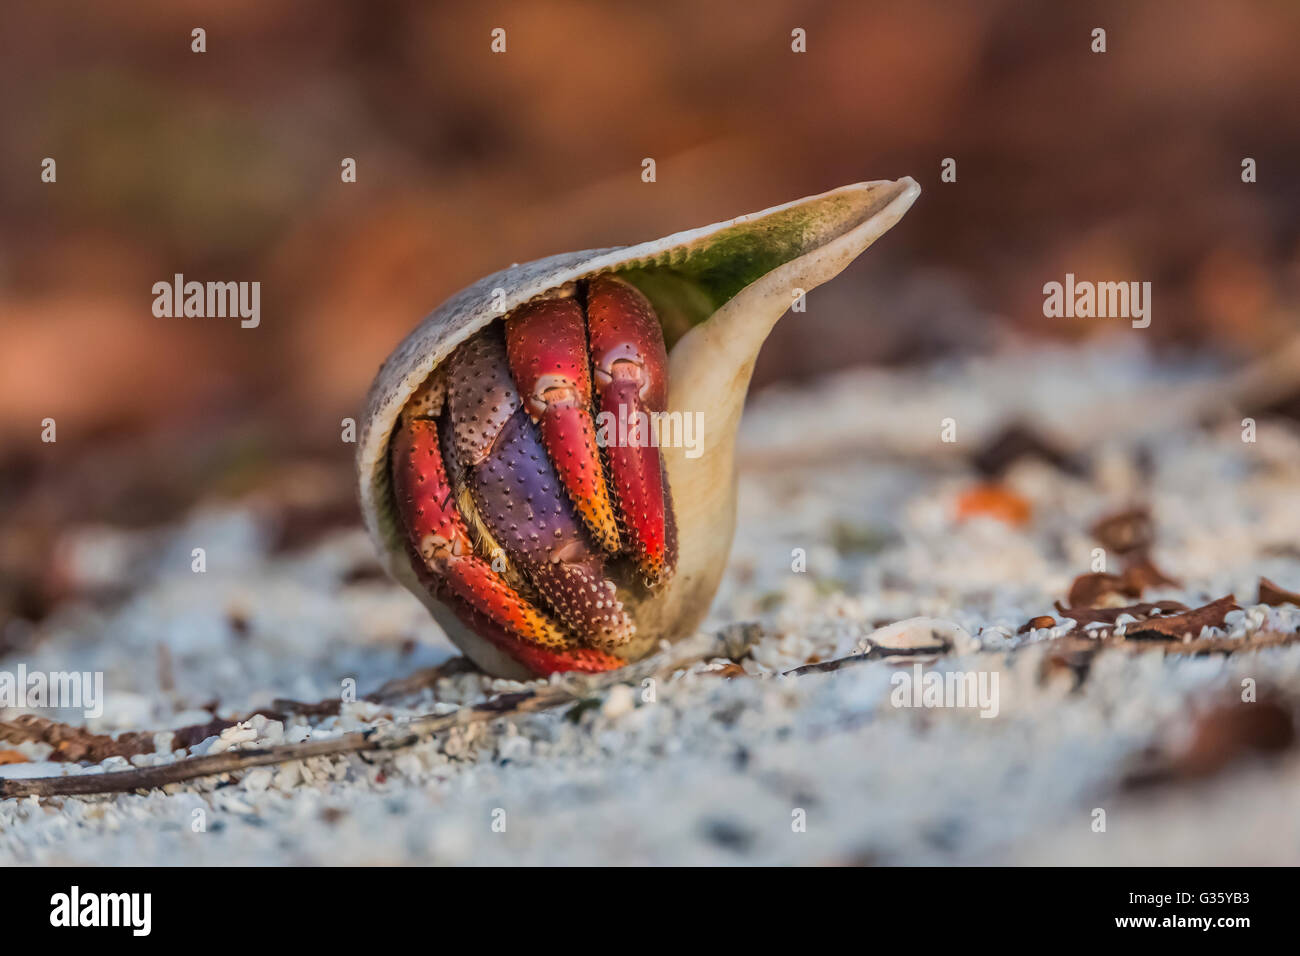 Carribean Hermit Crab, Coenobita clypeatus, foraging in its appropriated whelk shell, Dry Tortugas National Park, Florida, USA Stock Photo